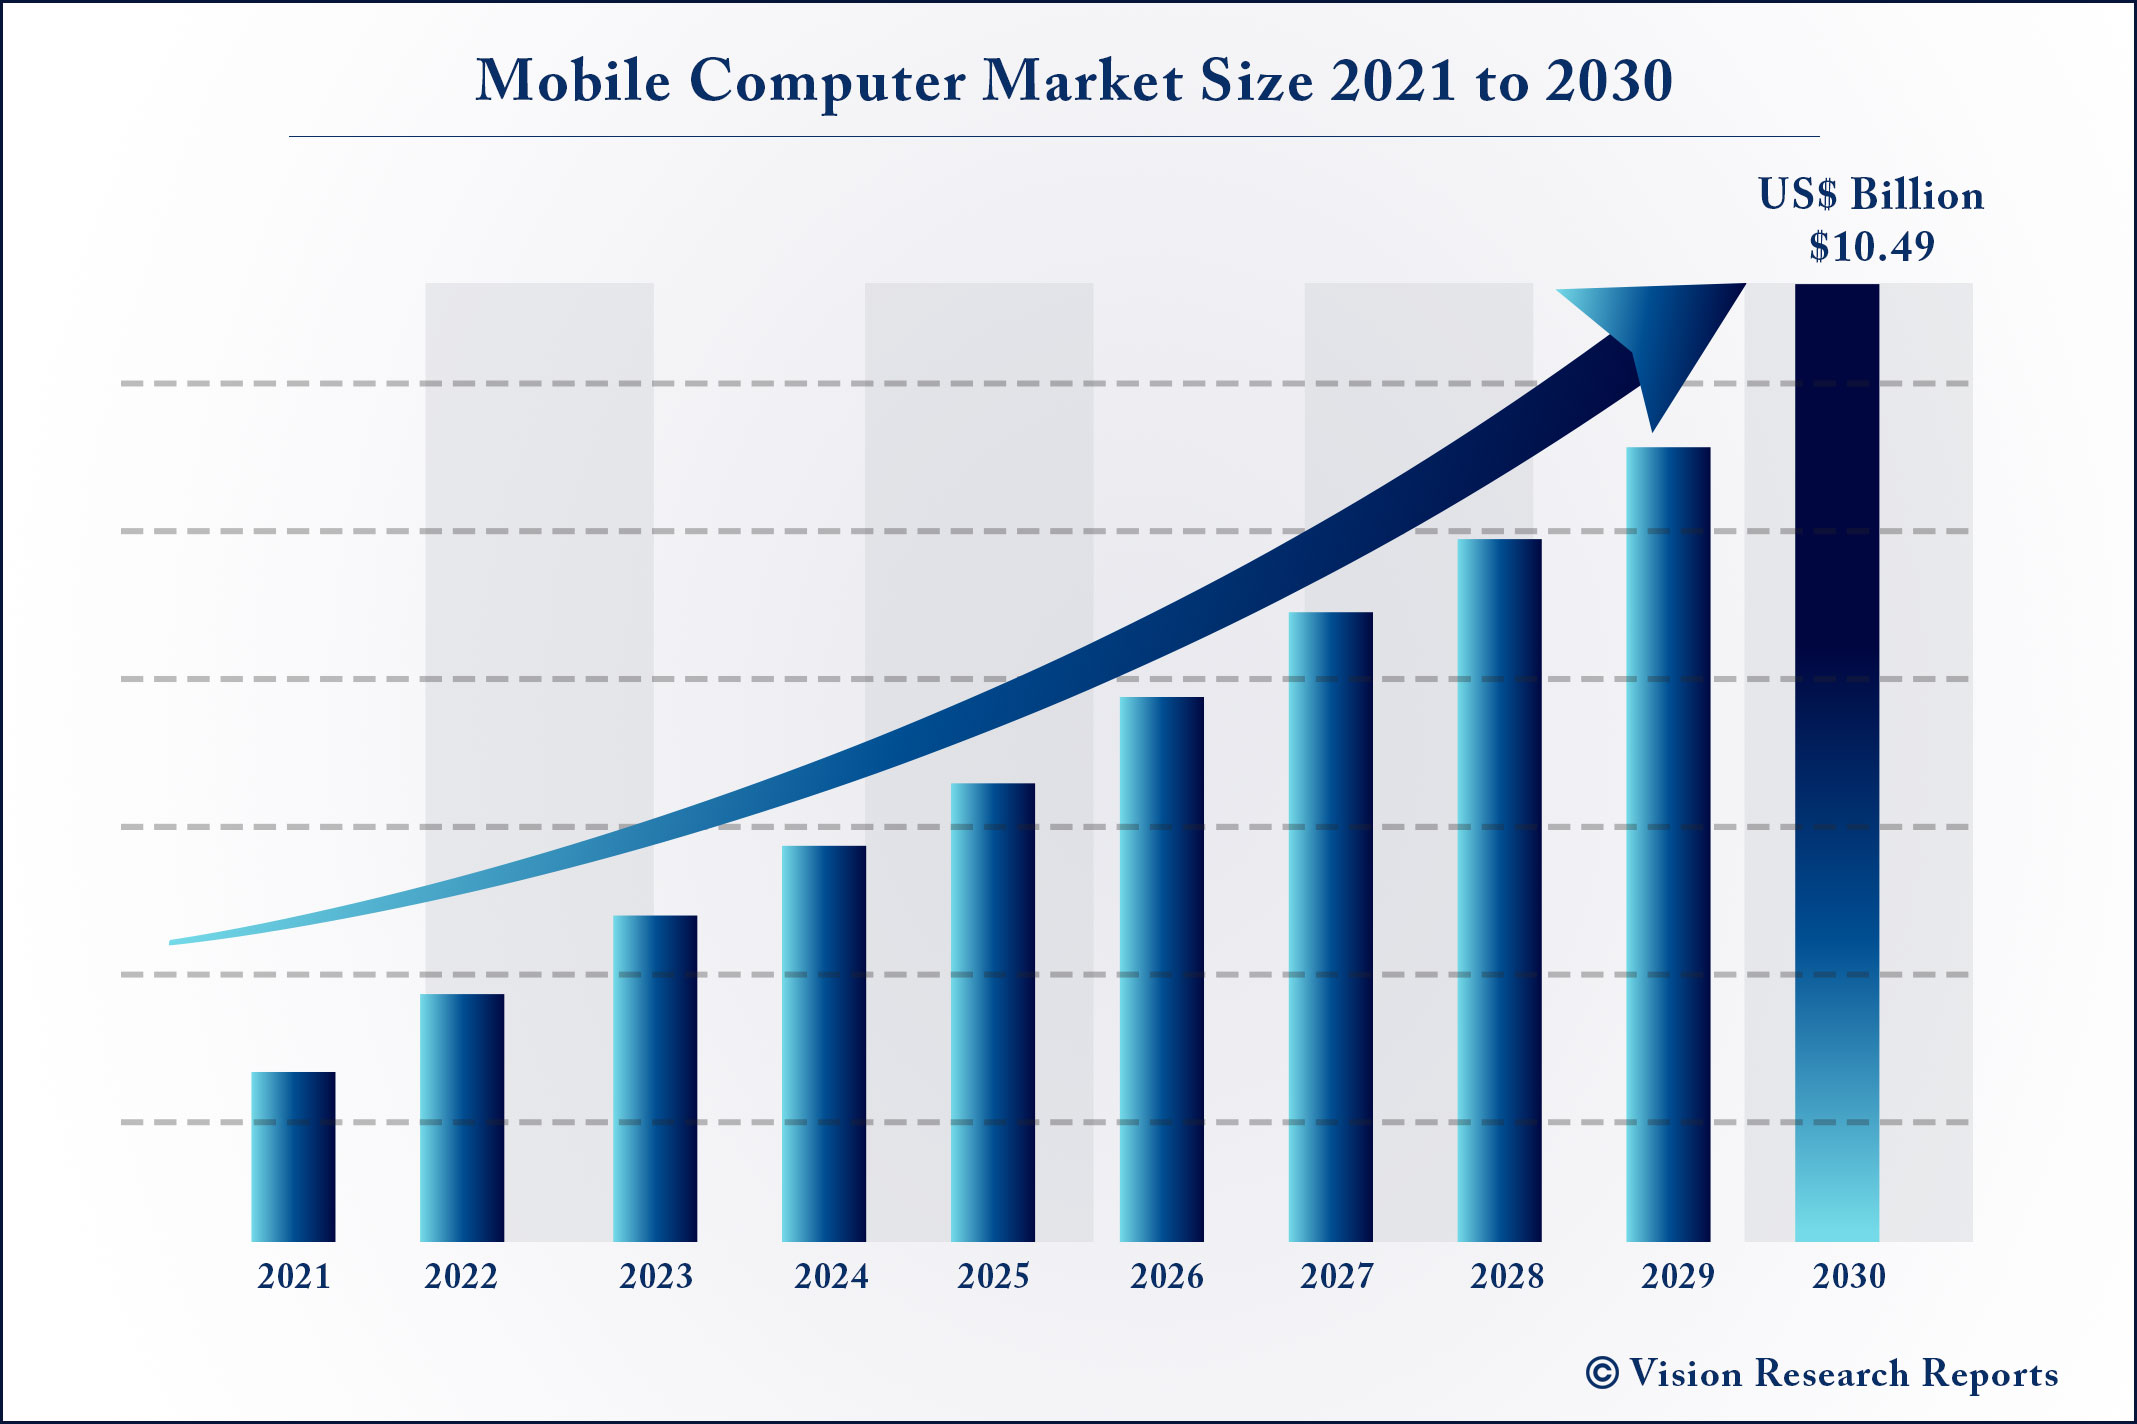 Mobile Computer Market Size 2021 to 2030